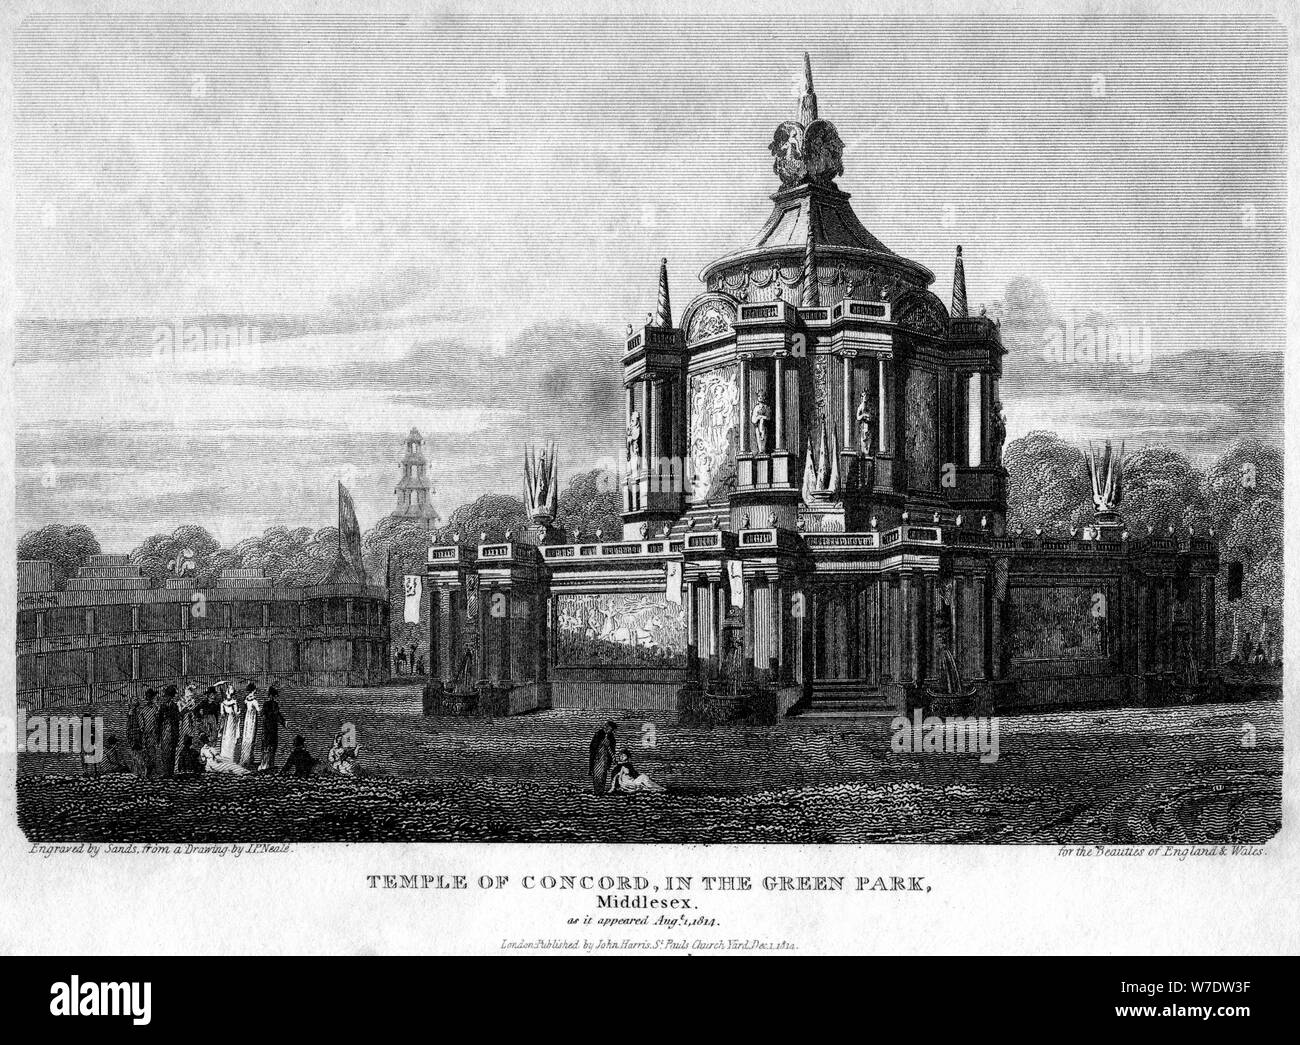 Temple of Concord, Green Park, Westminster, London, 1814.Artist: Sands Stock Photo